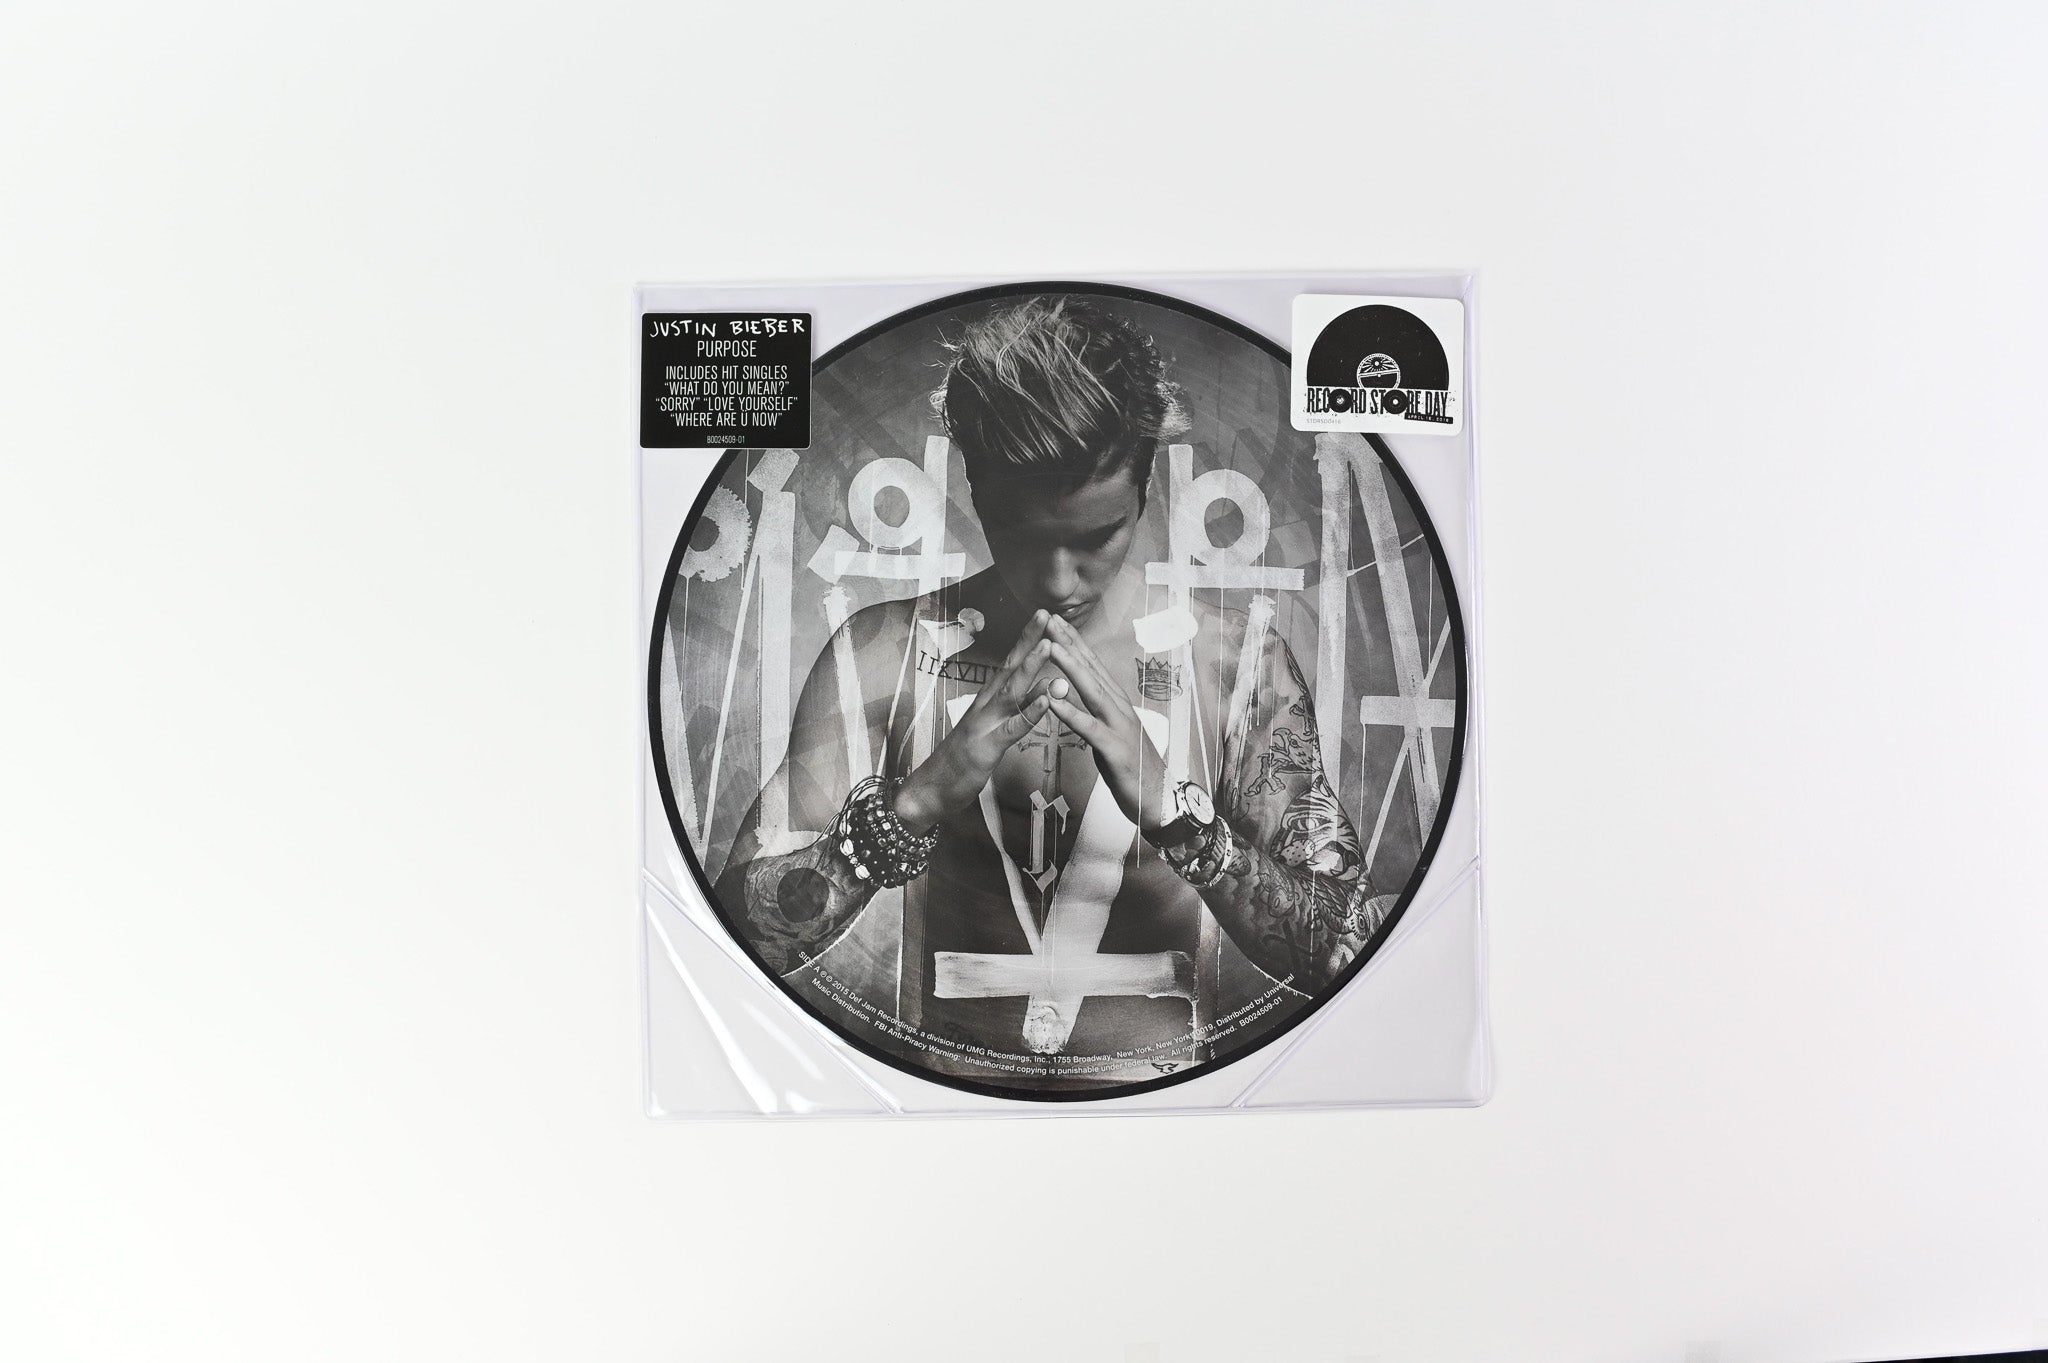 Justin Bieber - Purpose on Def Jam Picture Disc Sealed